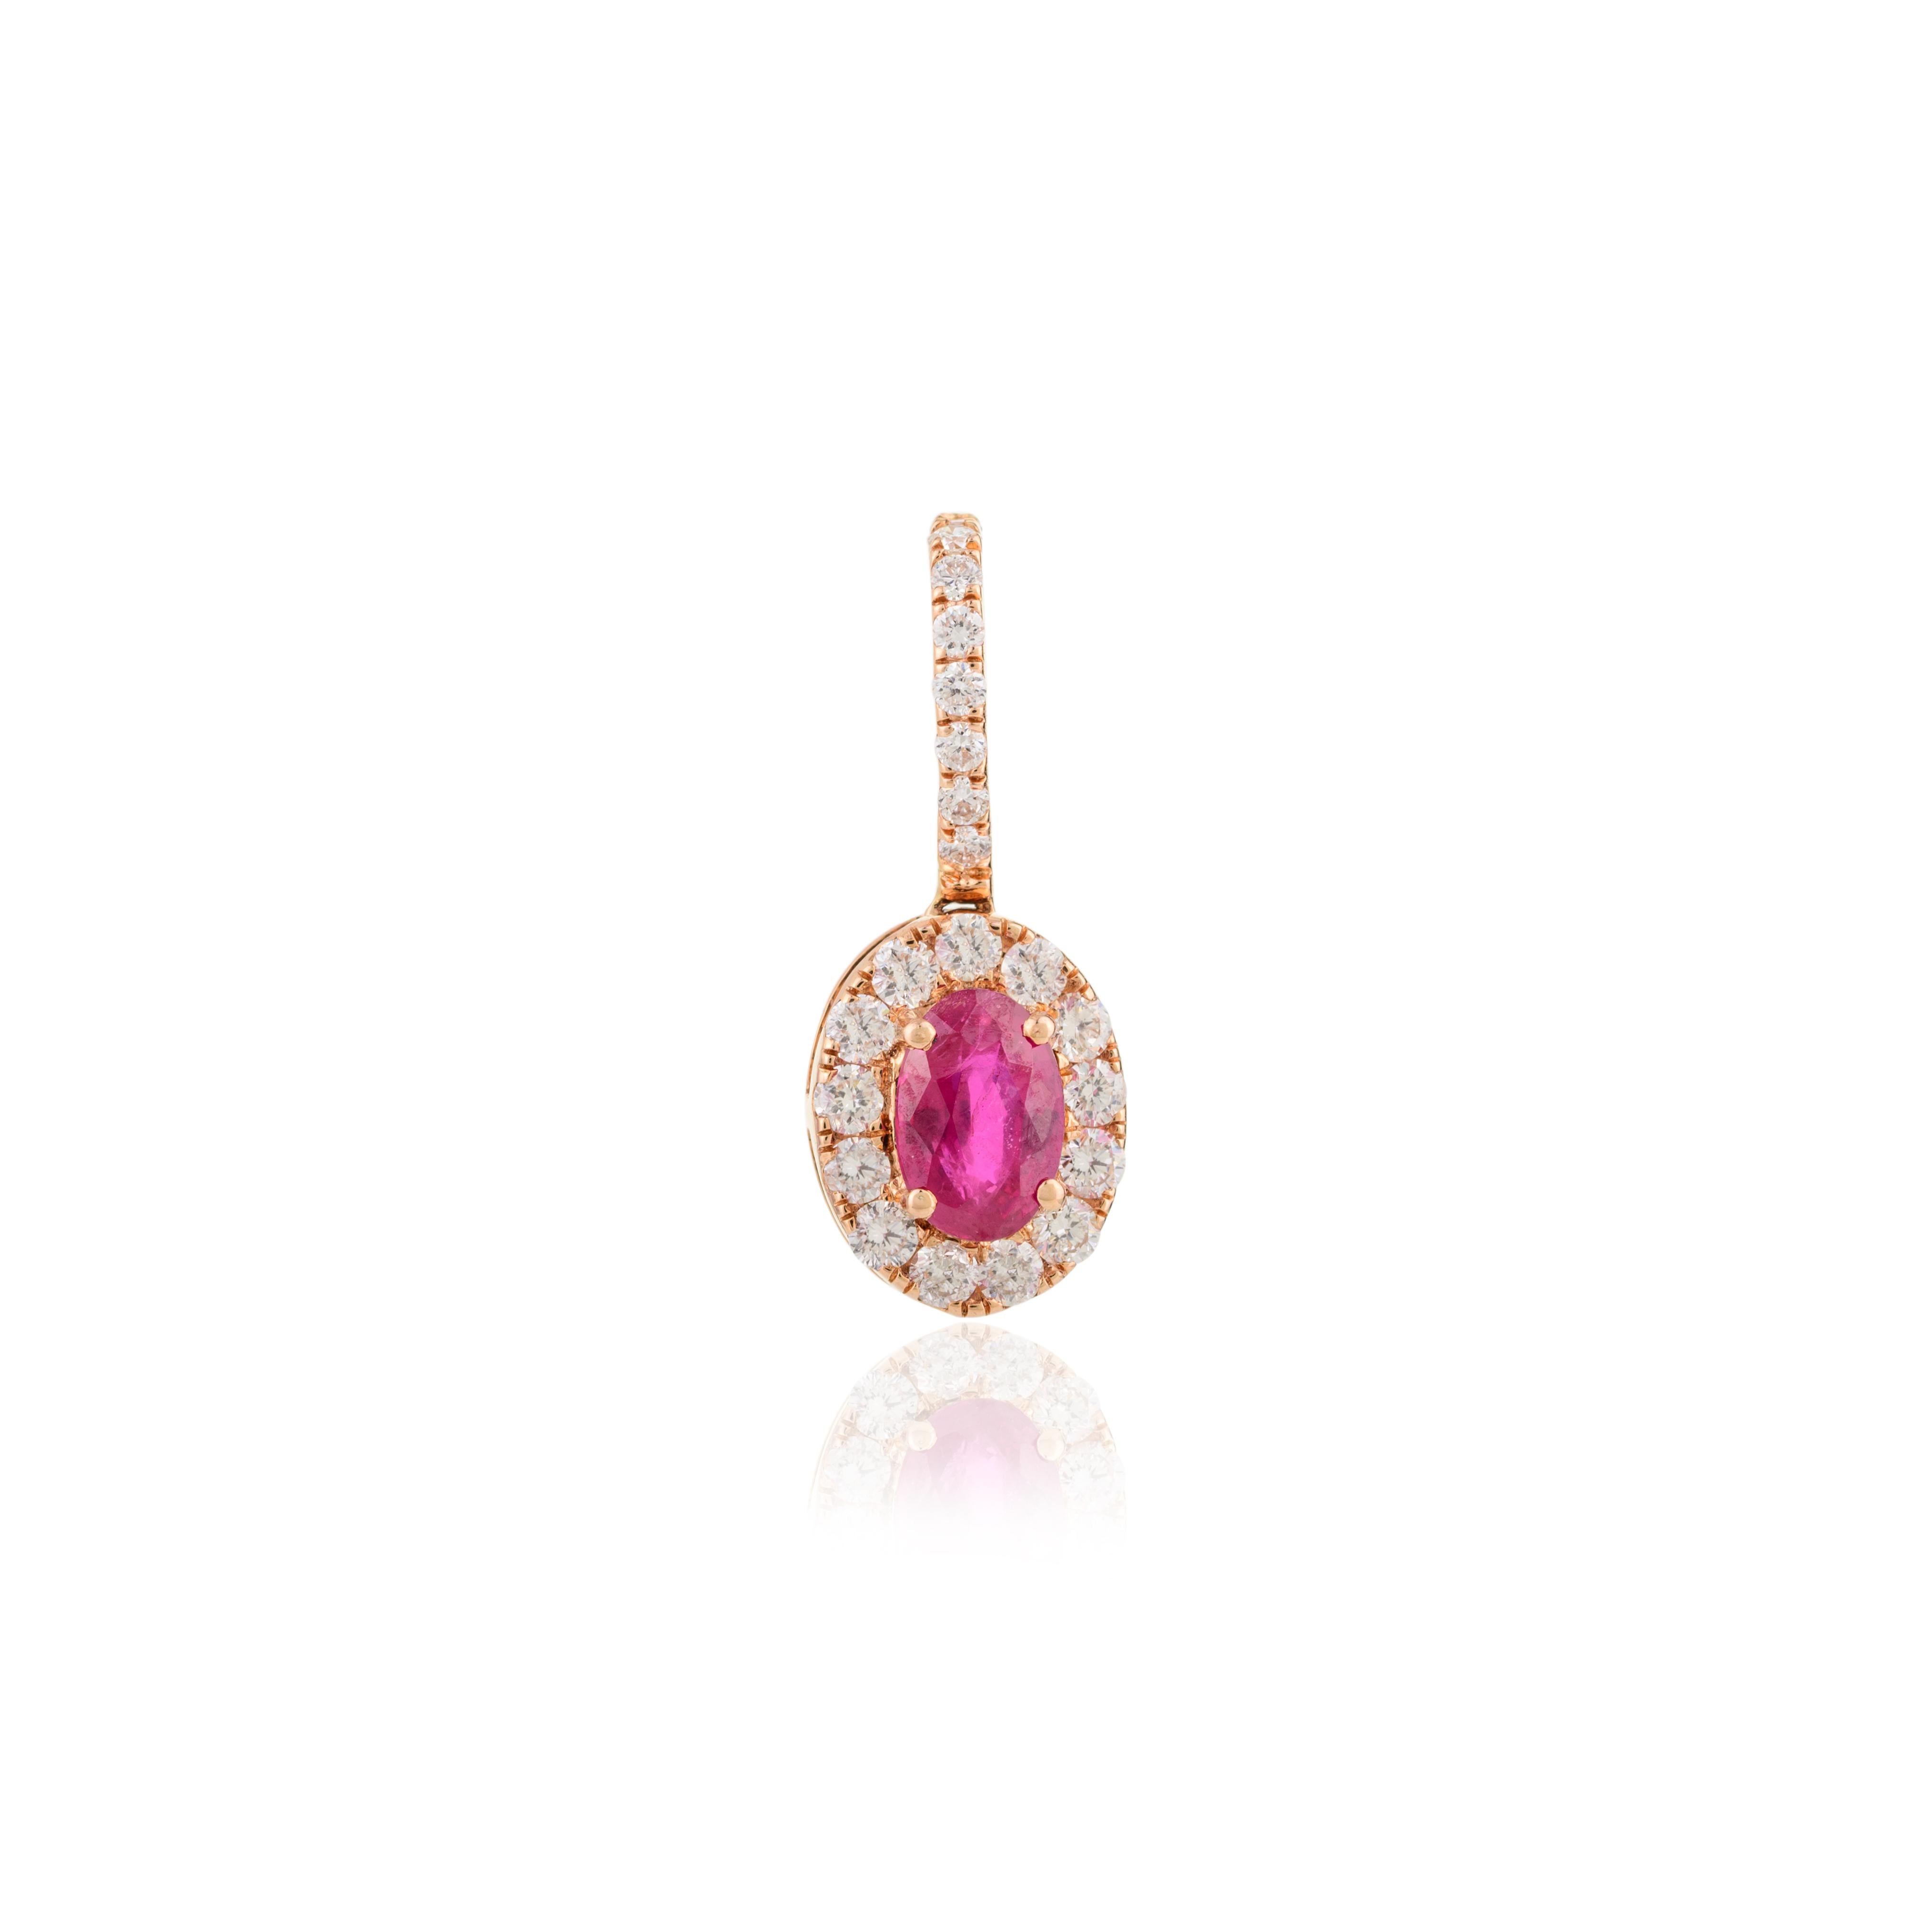 Oval Cut Genuine Ruby and Diamond Halo Pendant in 18k Solid Rose Gold Gift for Her For Sale